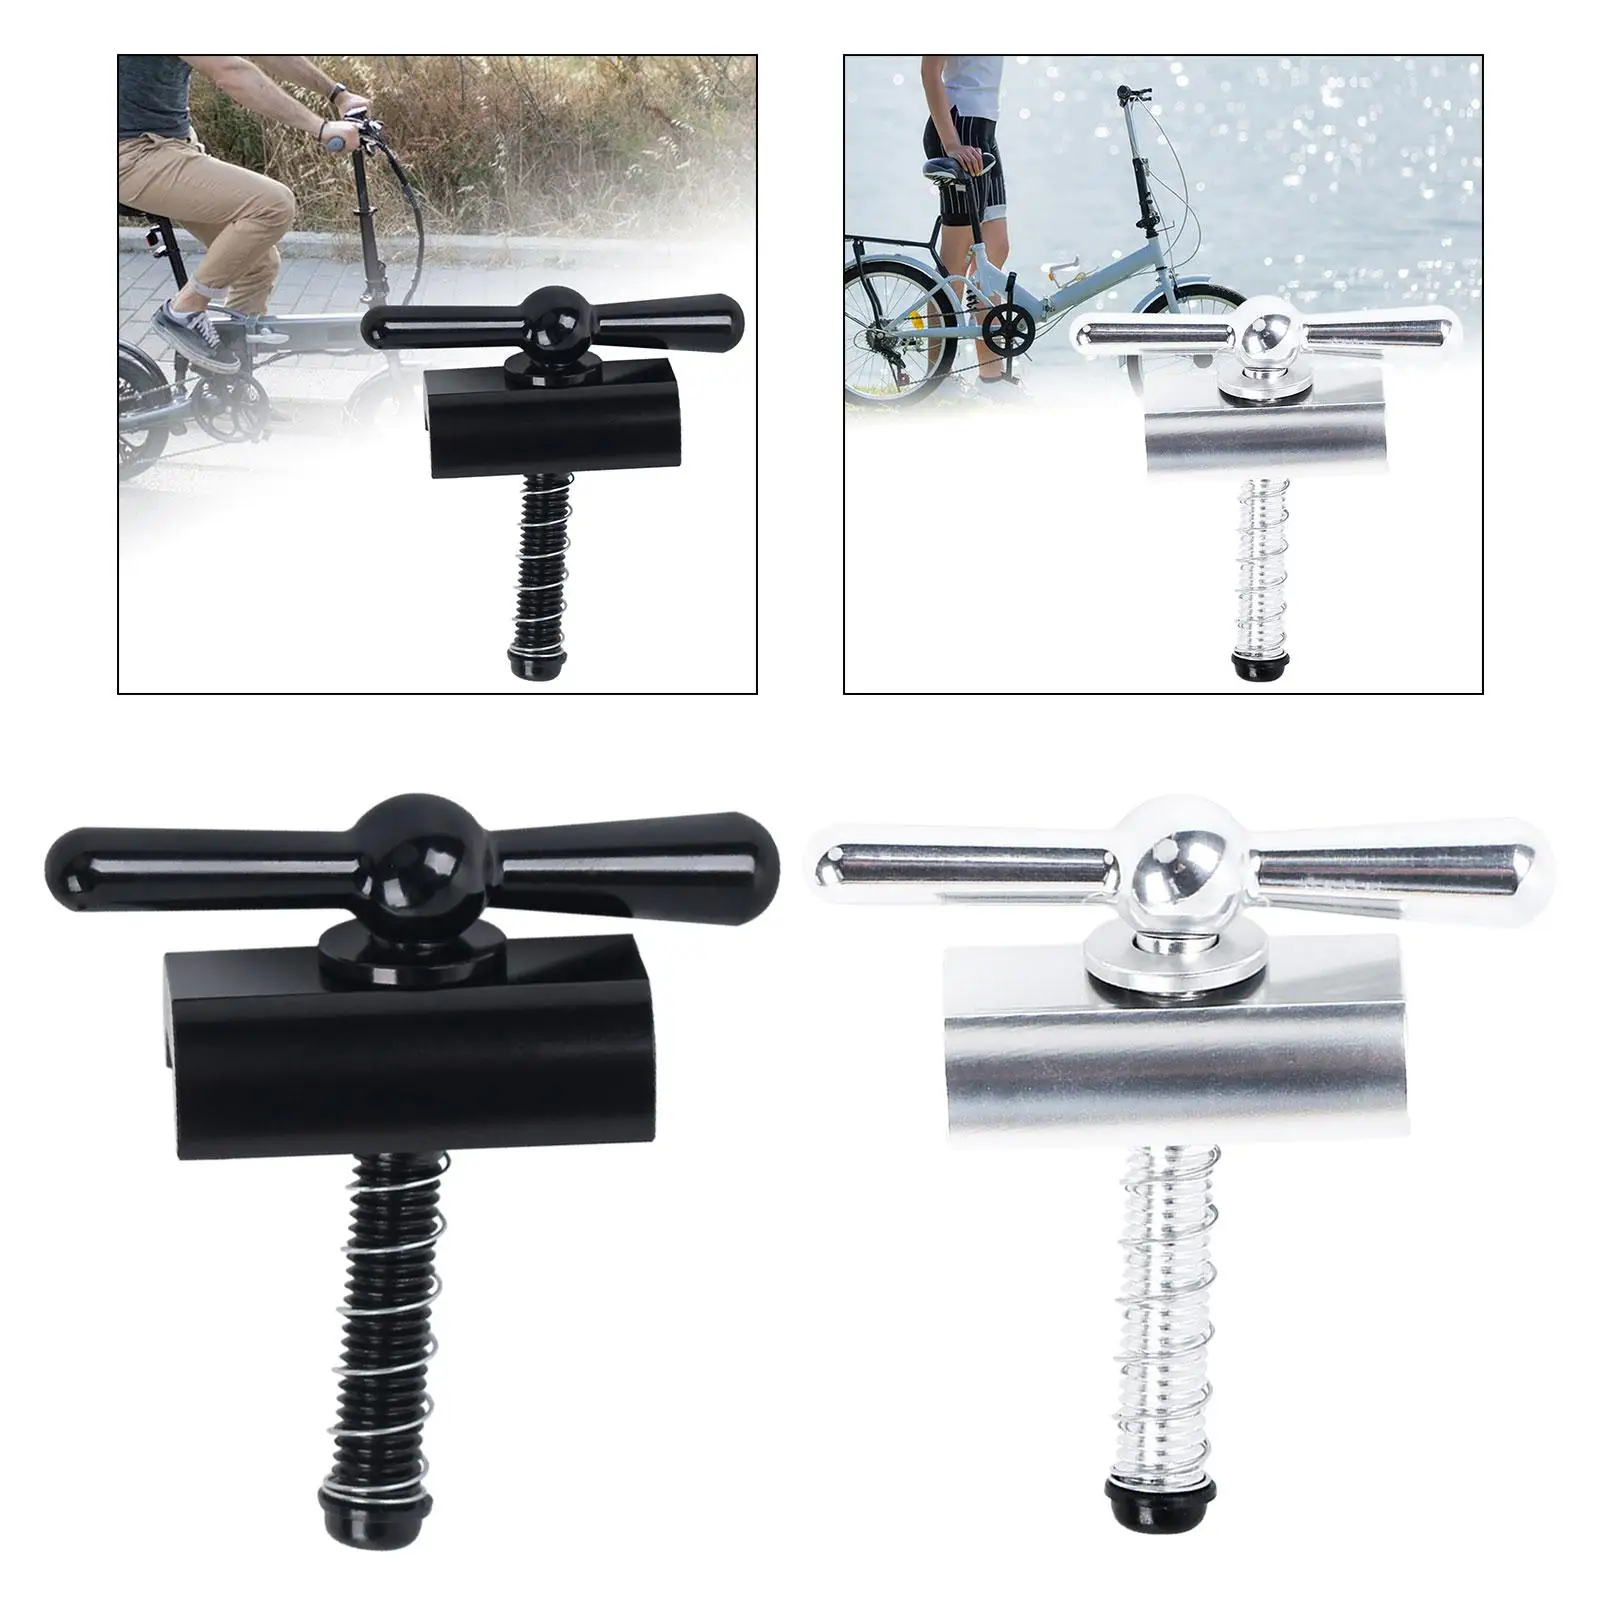 Folding Bike Hinge Clamp Aluminium Alloy Tight Fit C Buckle Bicycle Hinge Clamp Lever Bicycle Accessories for Frame Spare Parts